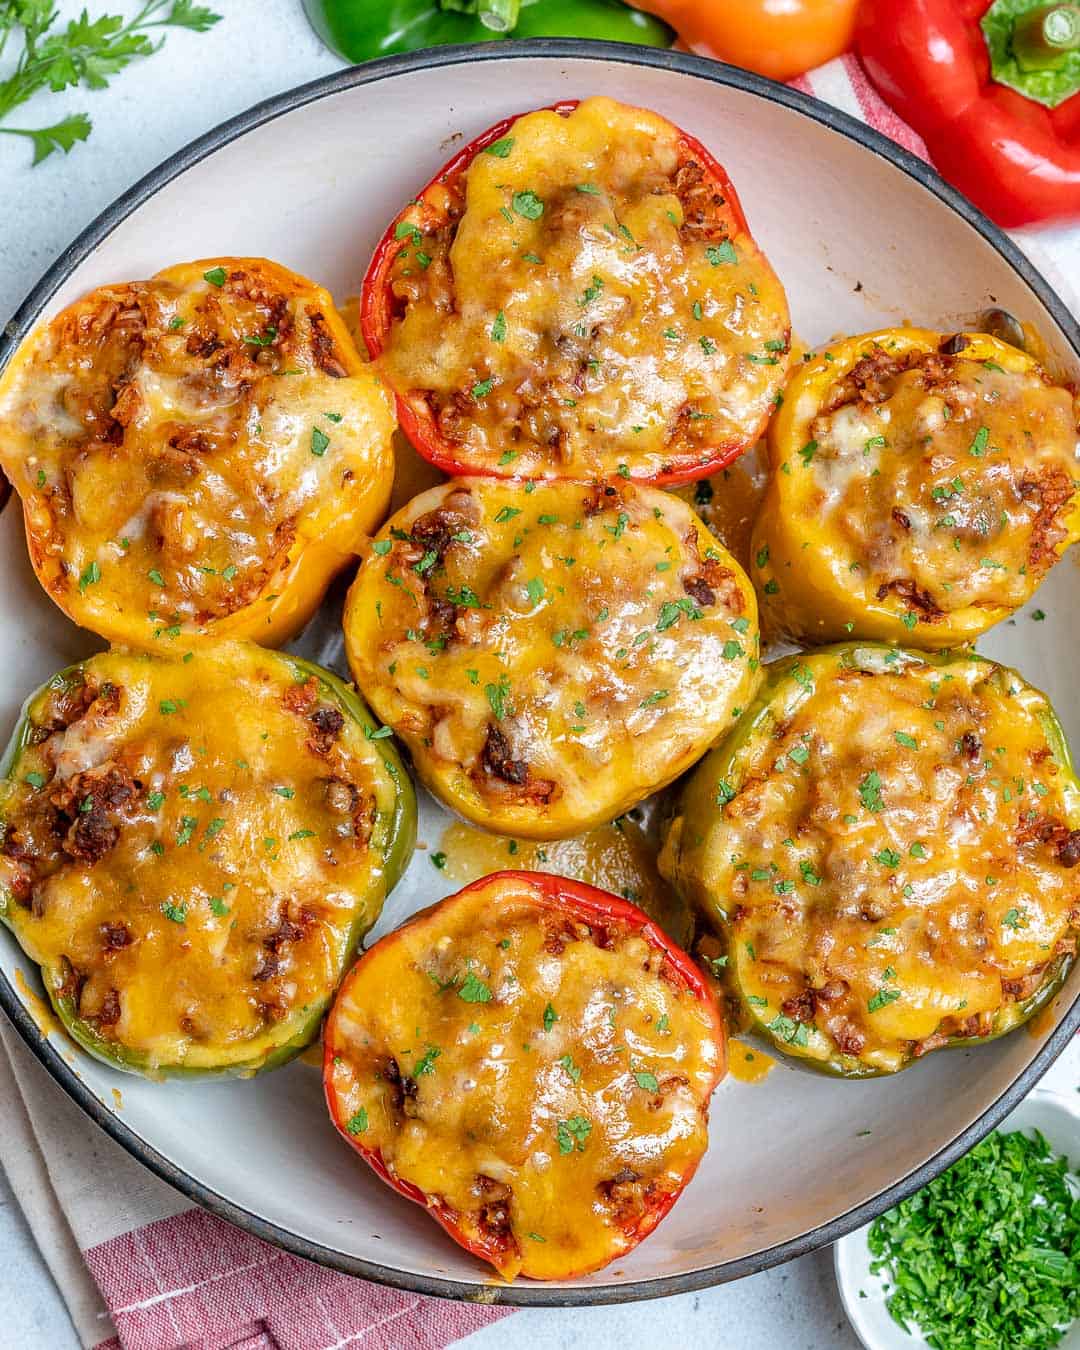 Easy Stuffed Peppers Recipe Healthy Fitness Meals,Types Of Birch Trees In Wisconsin